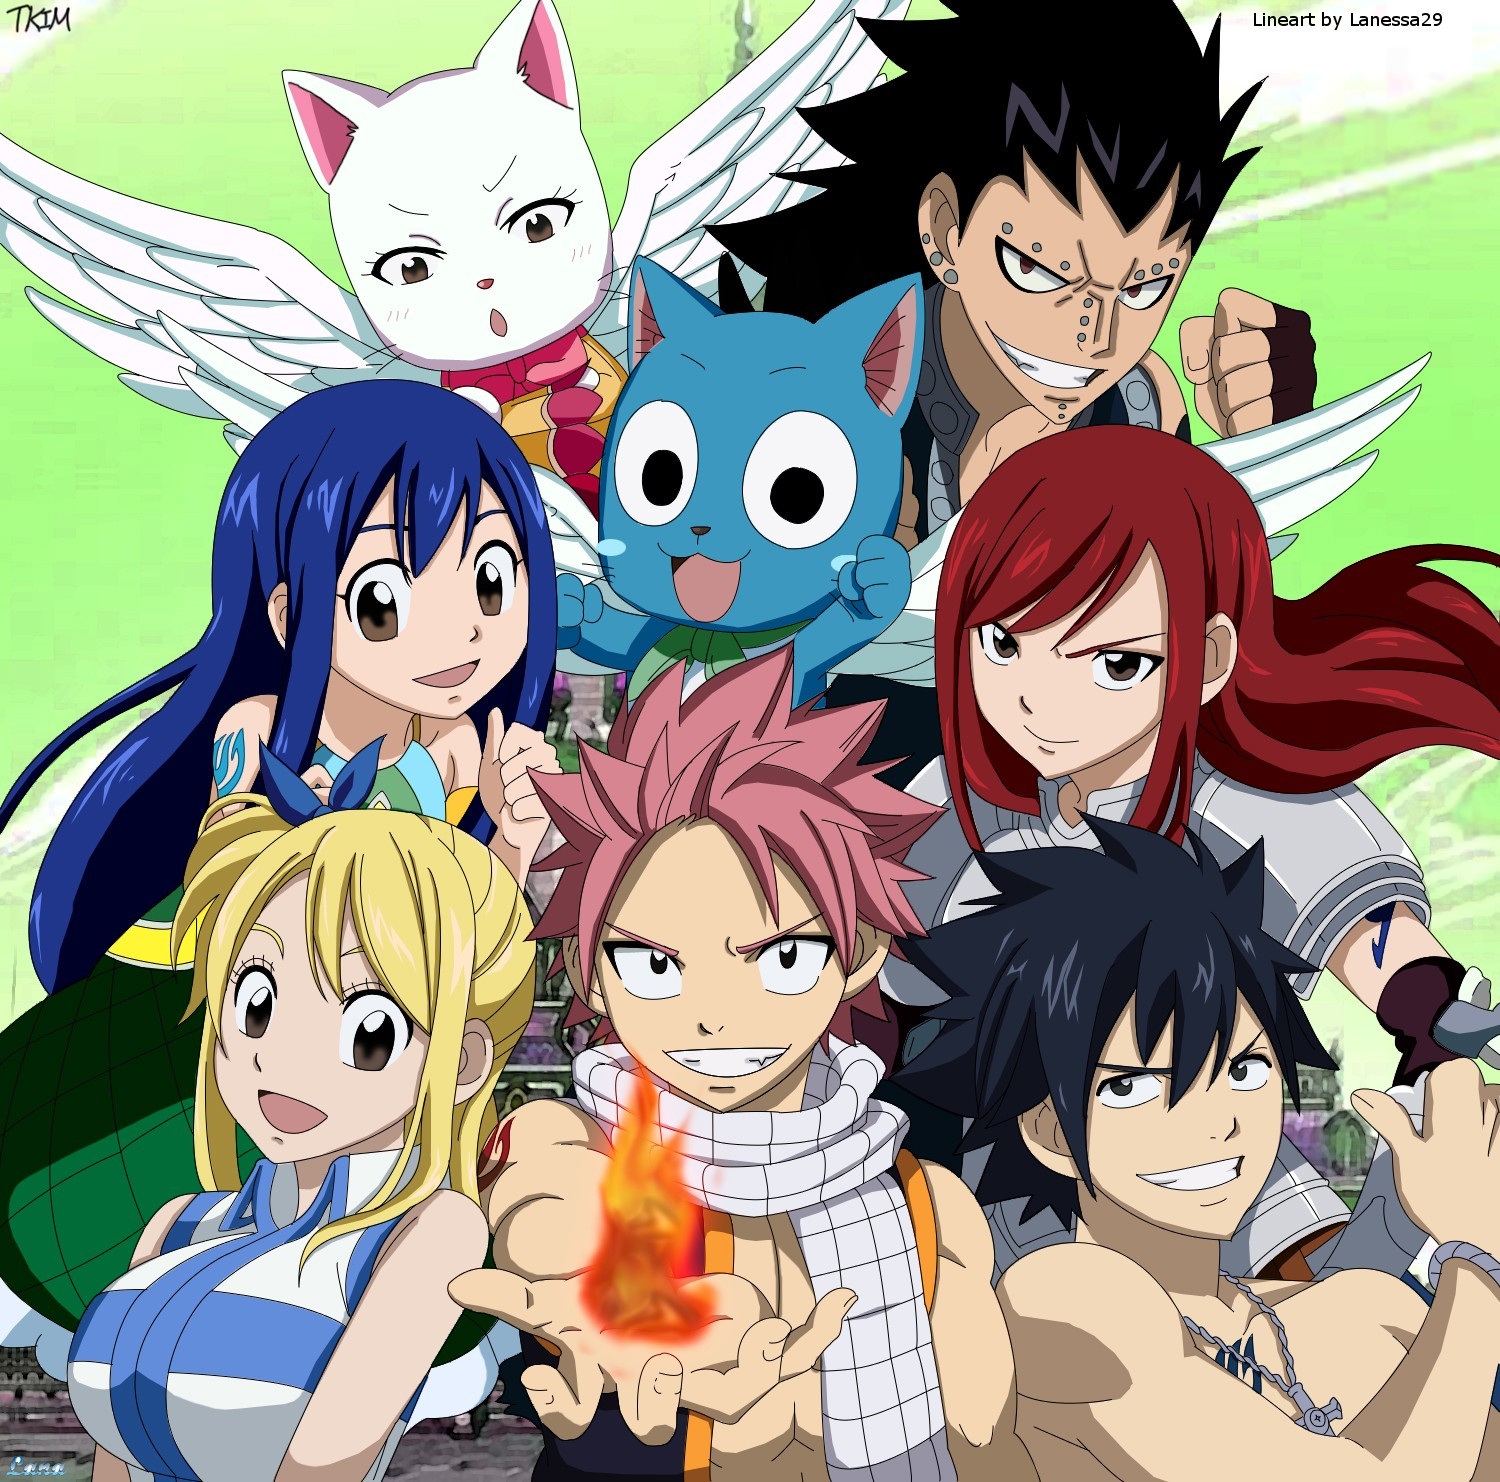 Anime 1500x1482 Fairy Tail Heartfilia Lucy  Dragneel Natsu Fullbuster Gray  Scarlet Erza Gajeel Redfox Marvell Wendy  Happy (Fairy Tail) anime anime girls anime boys redhead blue hair blonde pink hair dark hair boobs big boobs looking at viewer